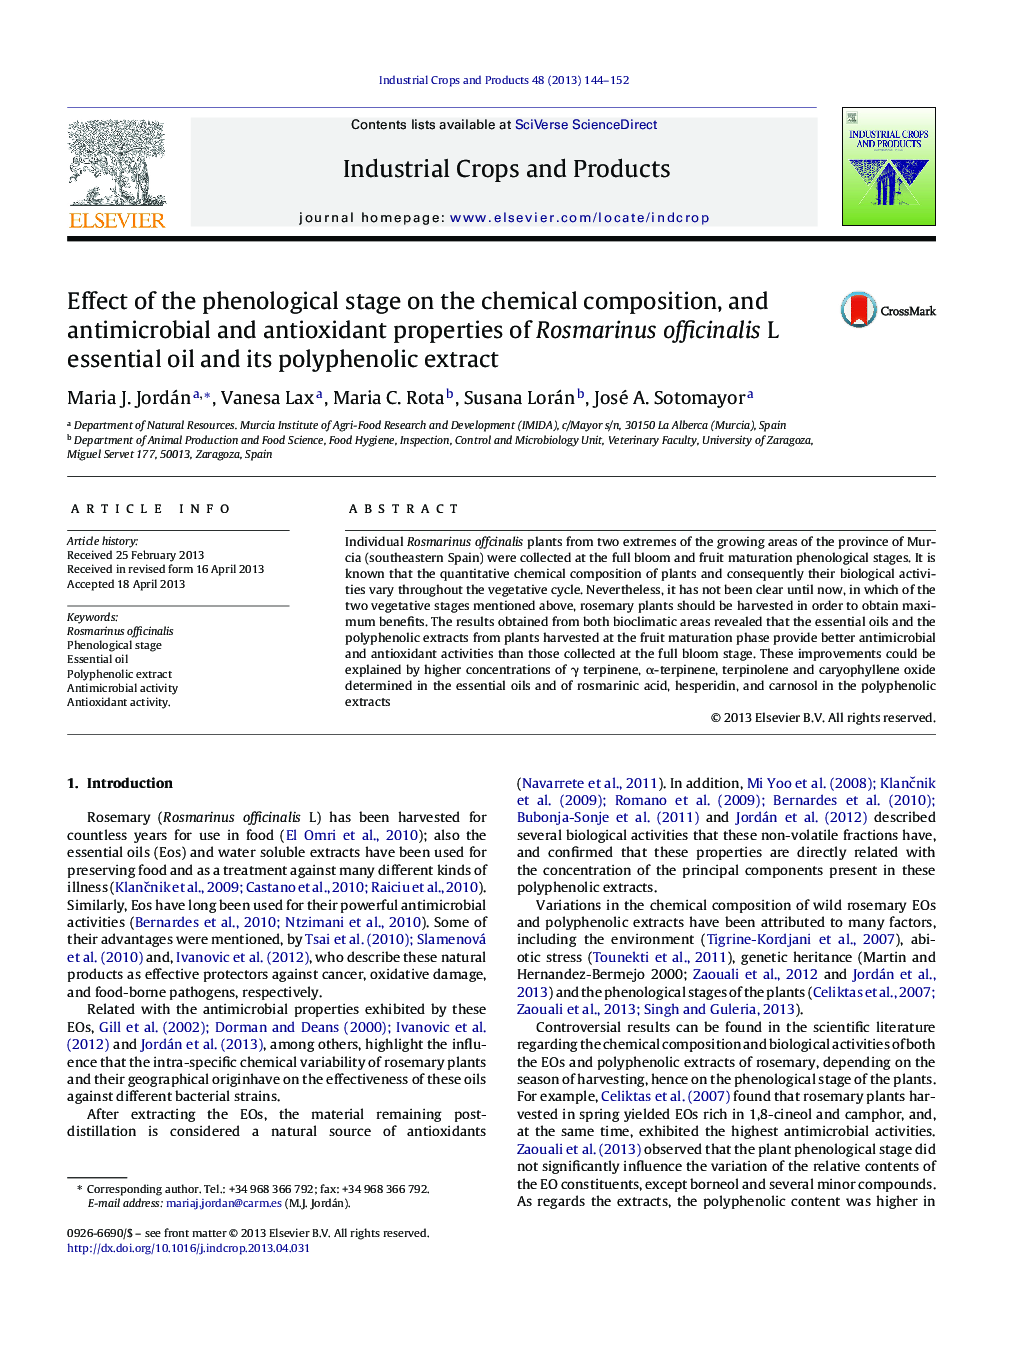 Effect of the phenological stage on the chemical composition, and antimicrobial and antioxidant properties of Rosmarinus officinalis L essential oil and its polyphenolic extract